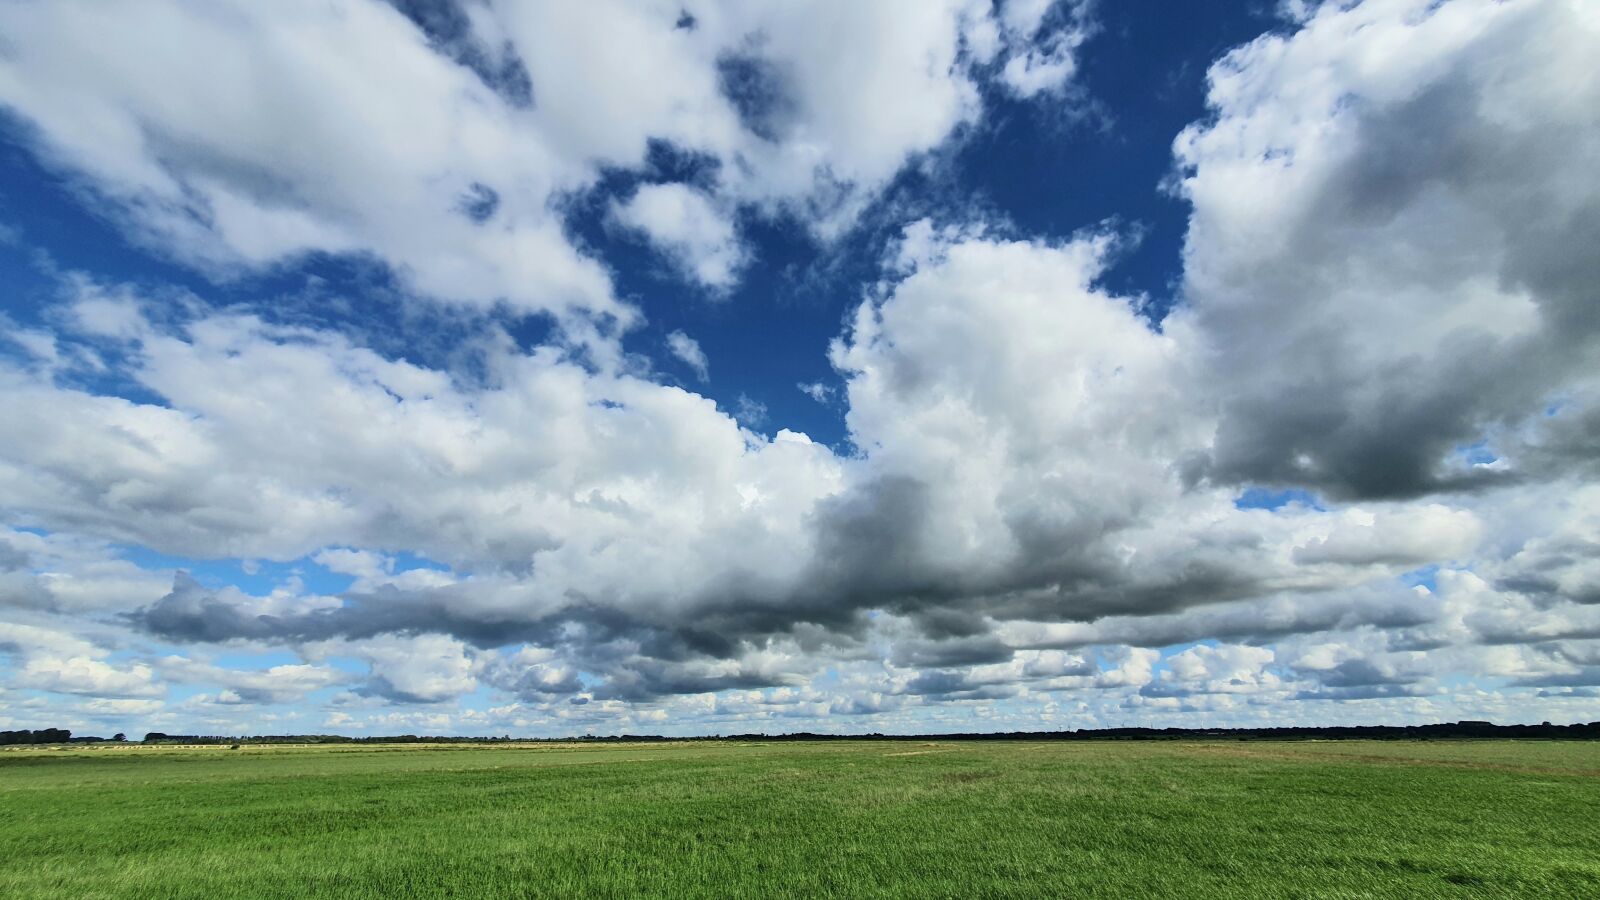 Samsung Galaxy S10+ sample photo. Mecklenburg, clouds, field photography